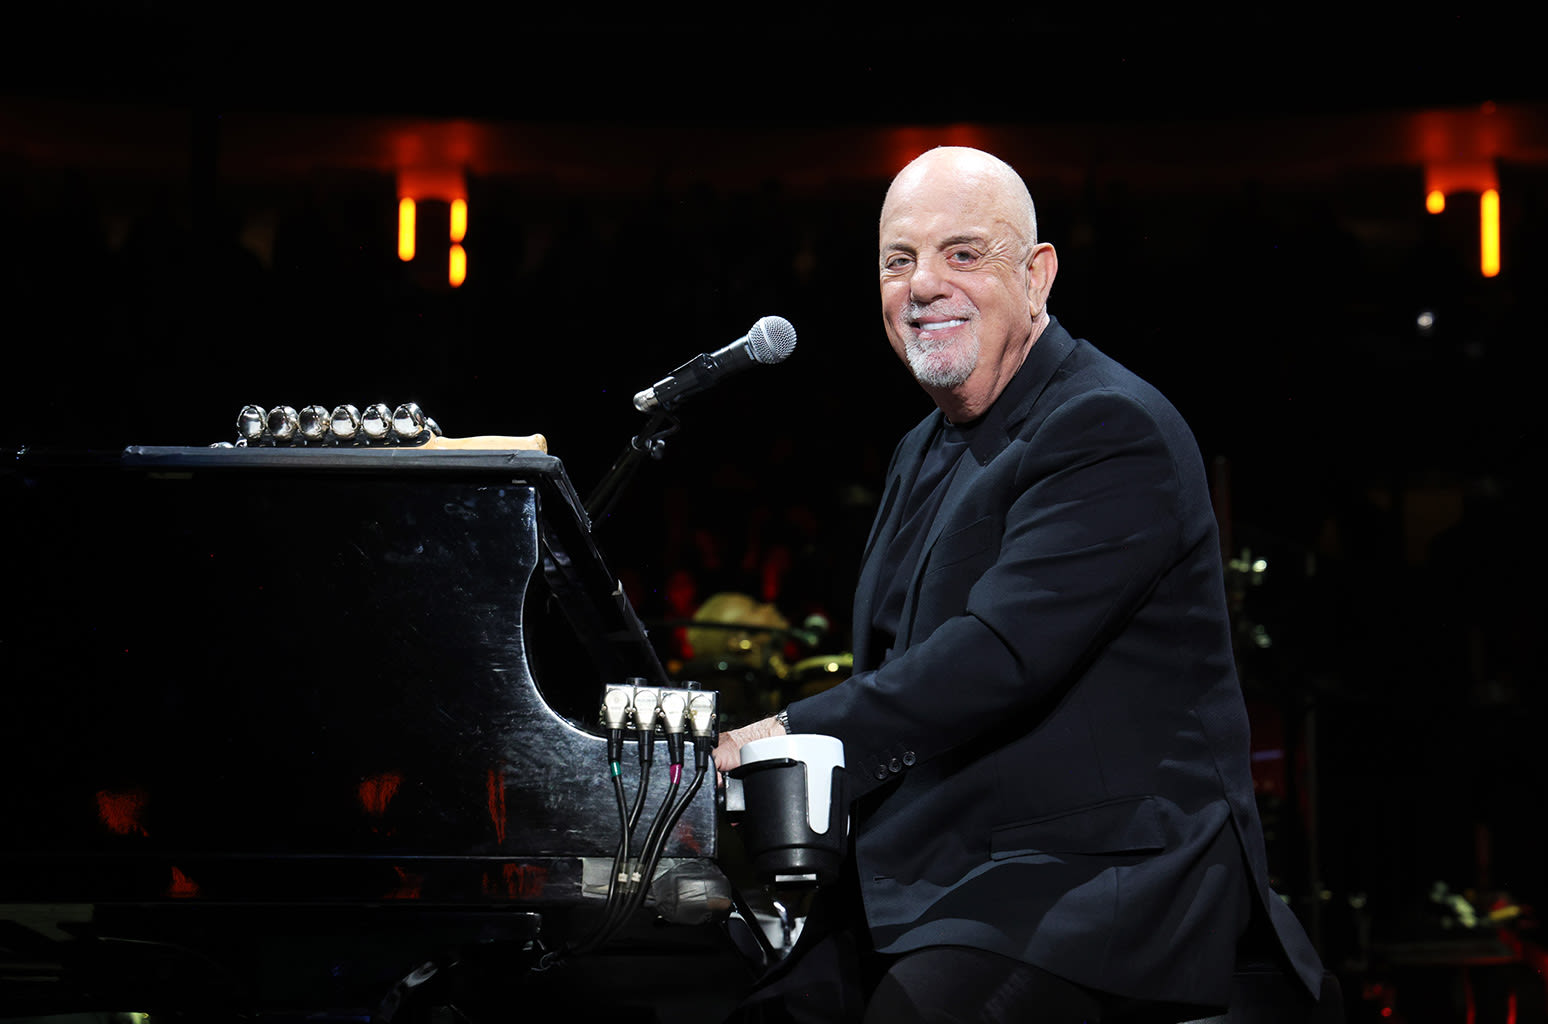 Billy Joel Talks Wrapping Up Decade-Long MSG Residency: ‘I Didn’t Want to Outstay My Welcome’